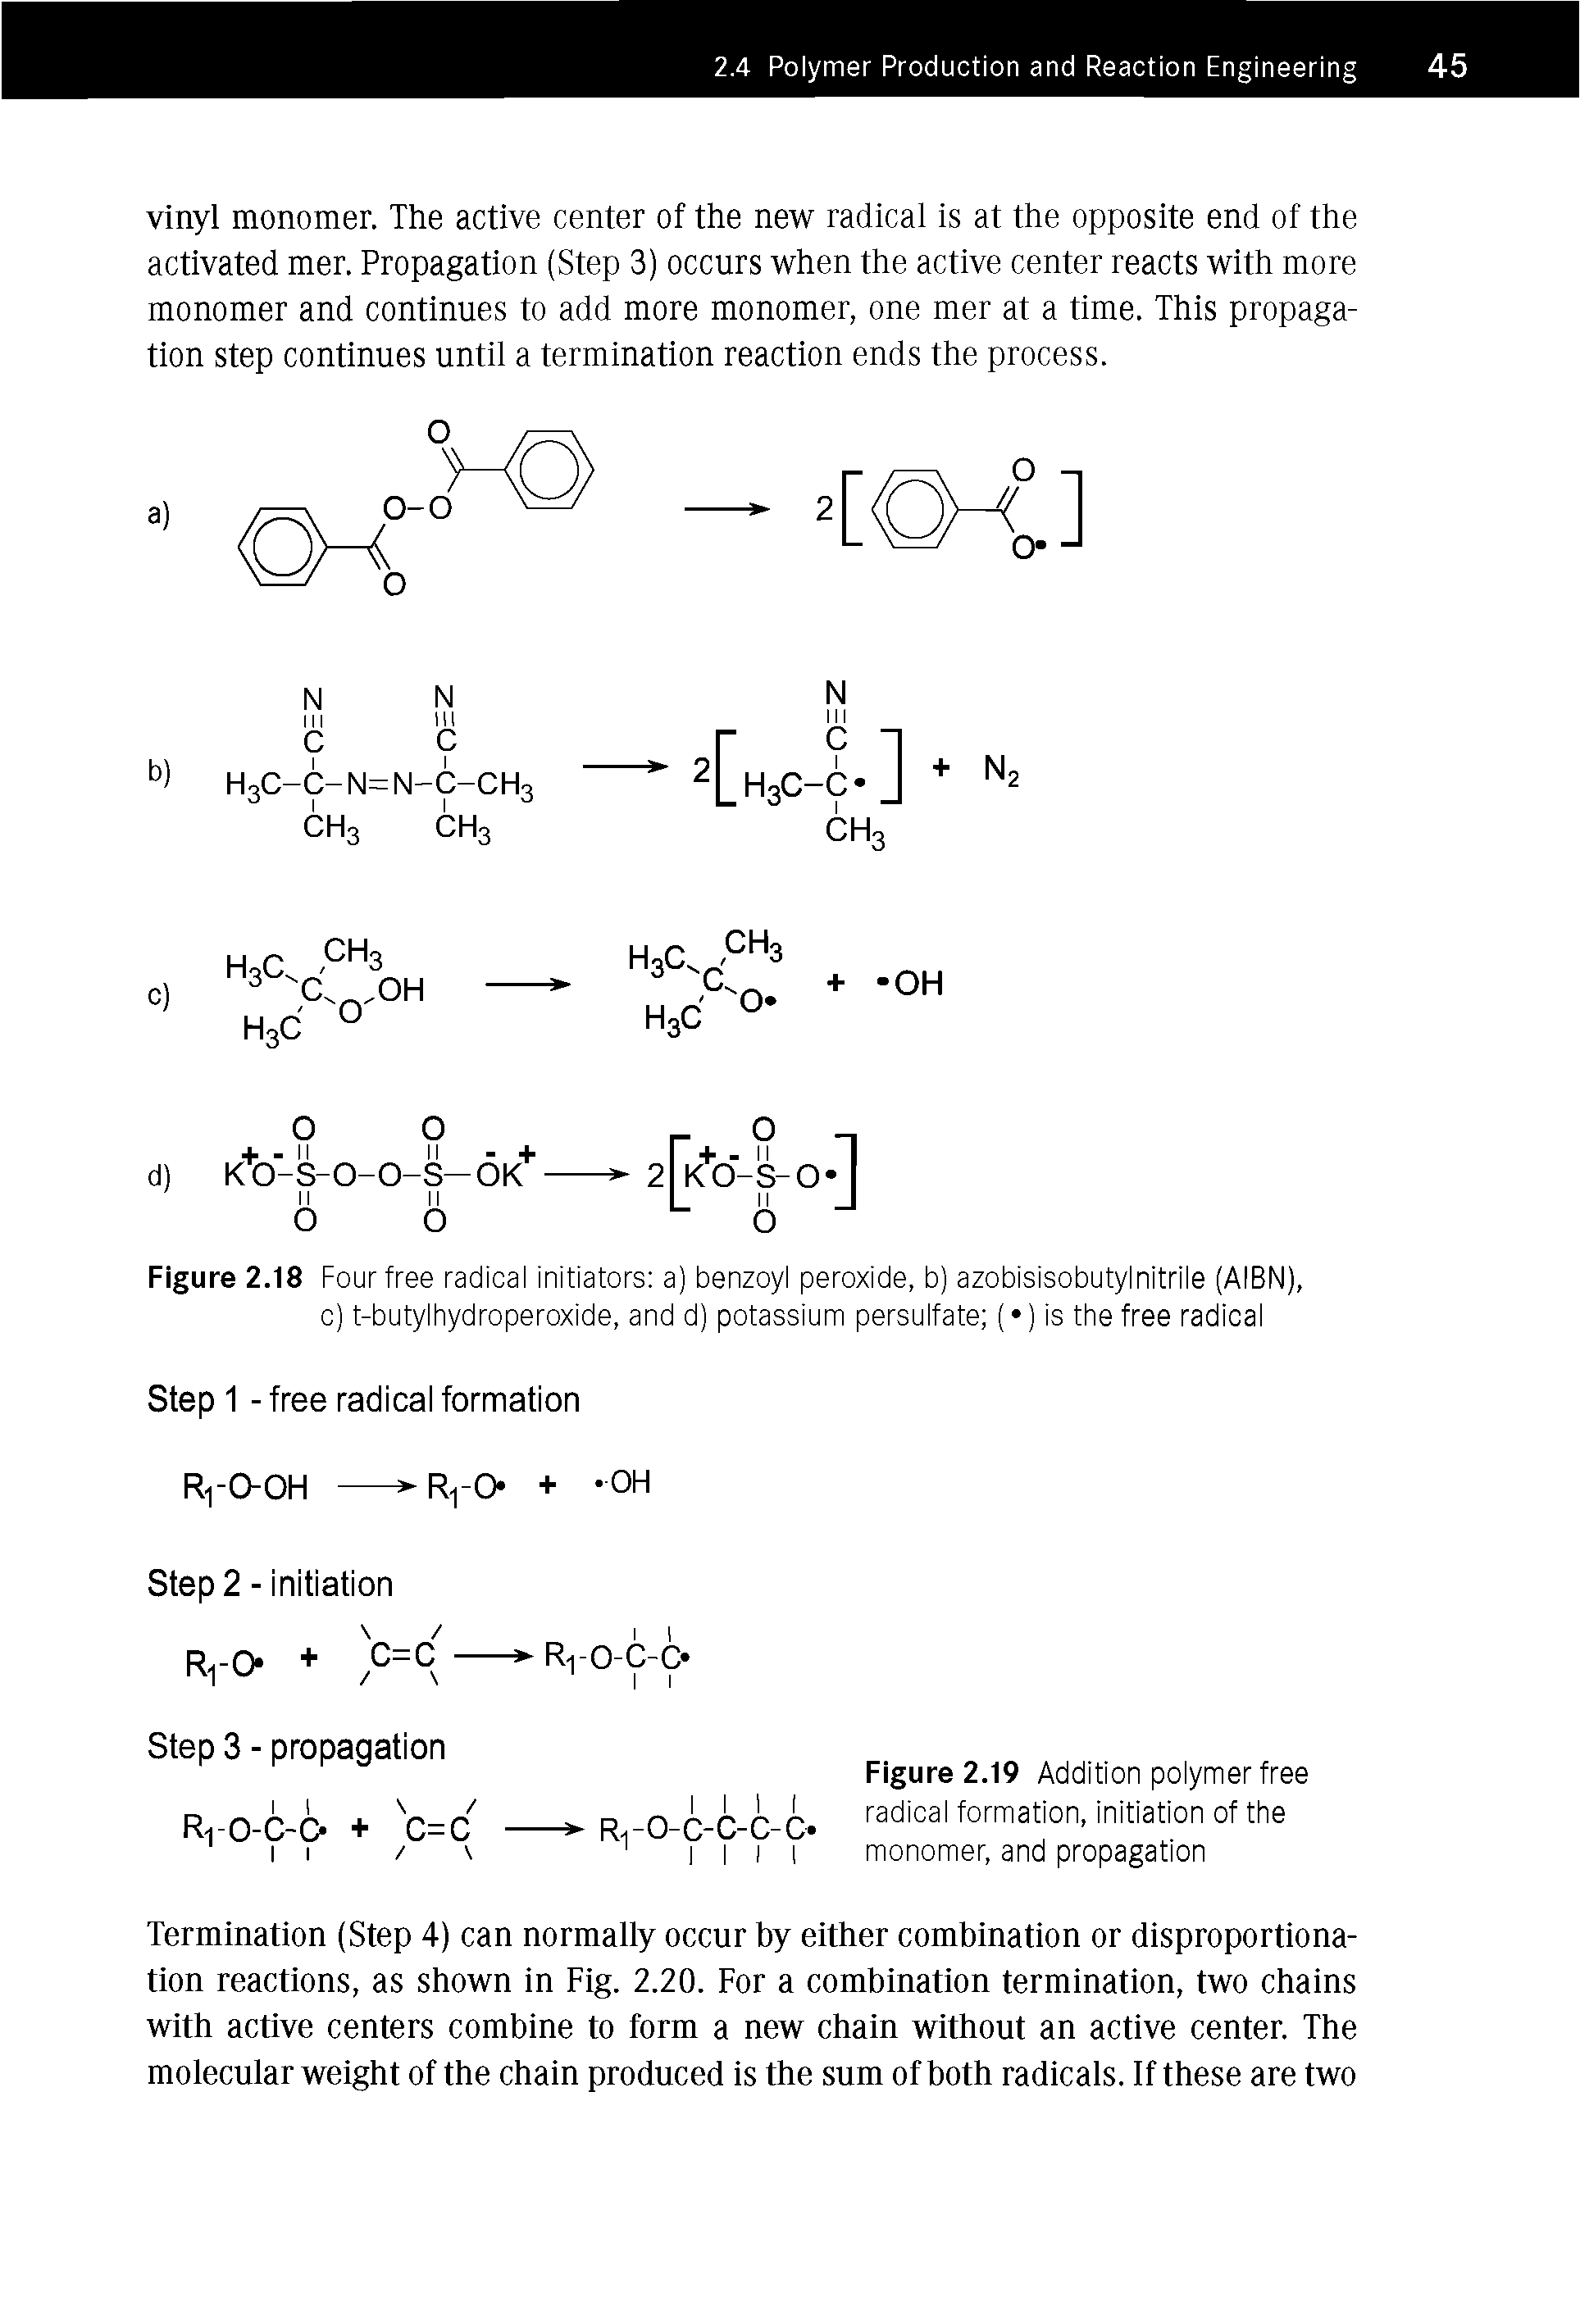 Figure 2.19 Addition polymer free radical formation, initiation of the monomer, and propagation...